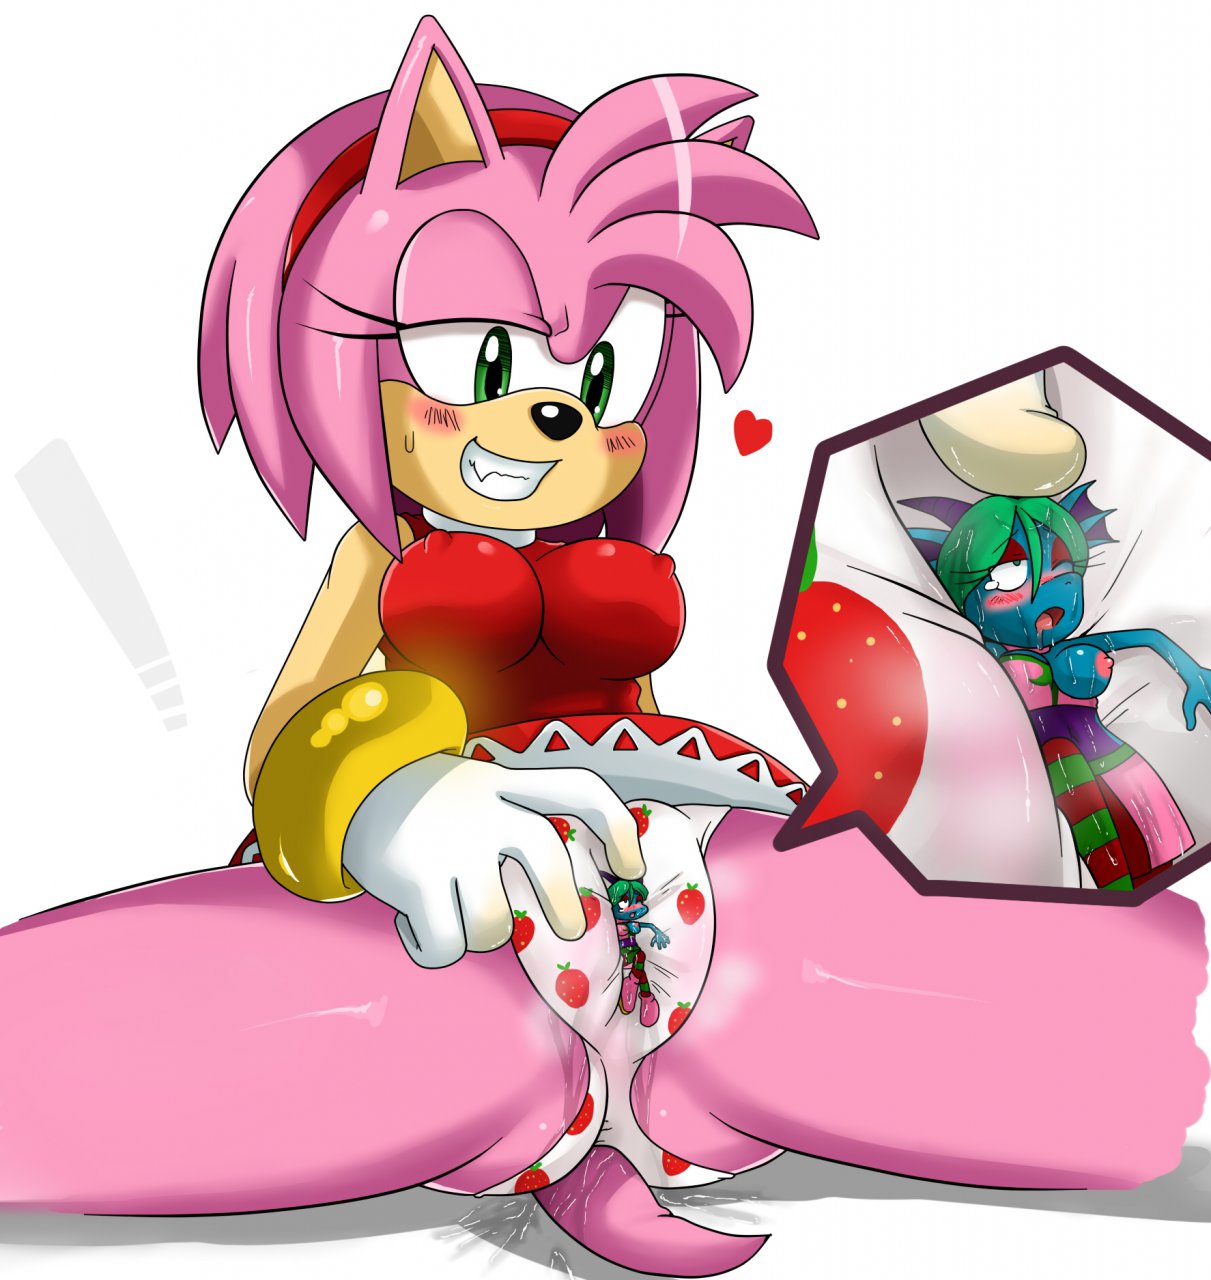 Amy Rose Anime Porn - Showing Xxx Images for Amy rose porn animated xxx | www.pornsink.com